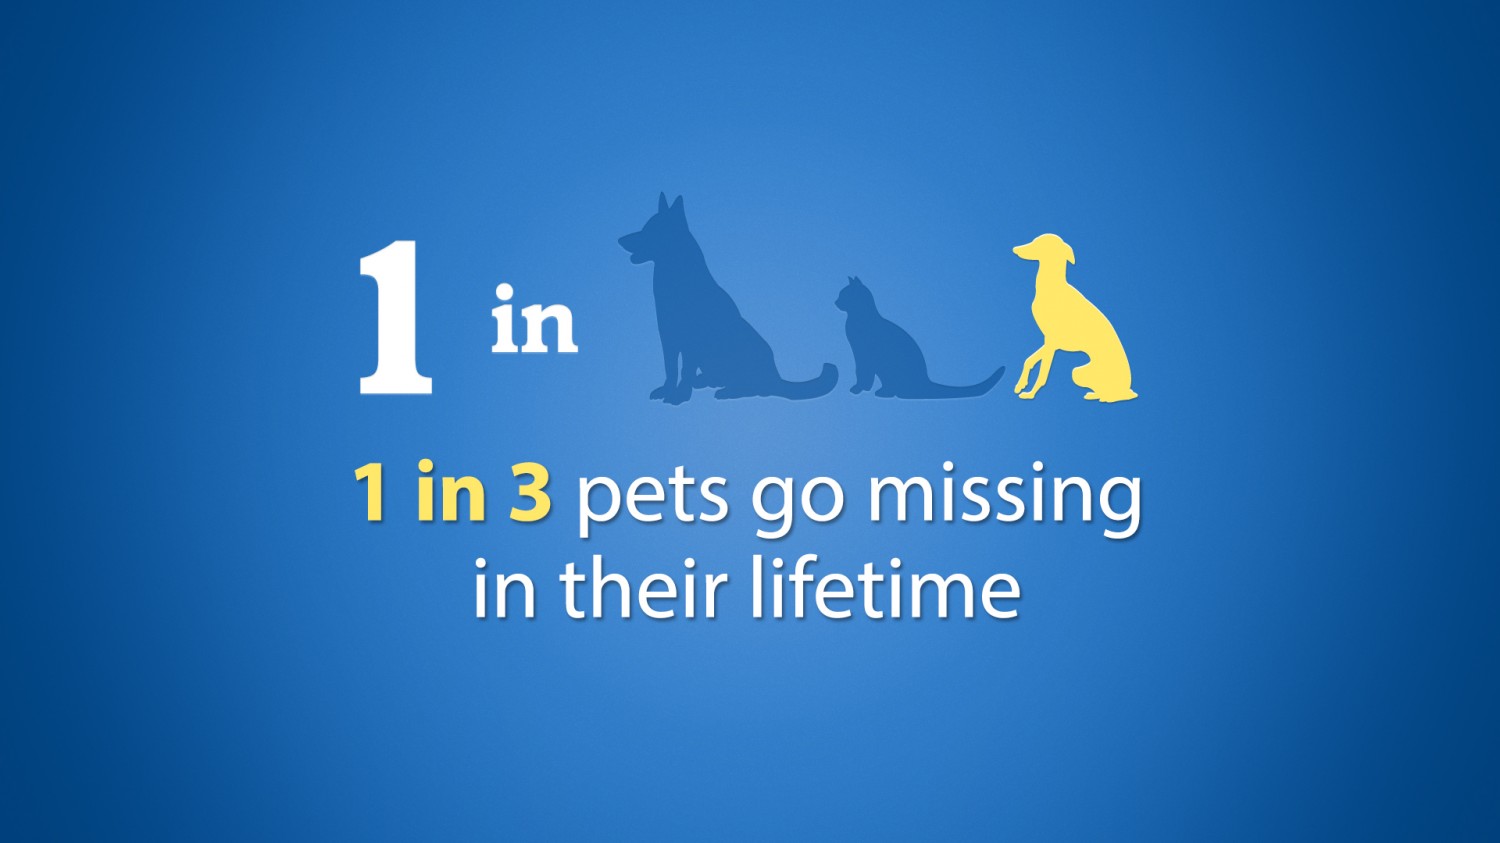 1 in 3 pets go missing in their lifetime infographic